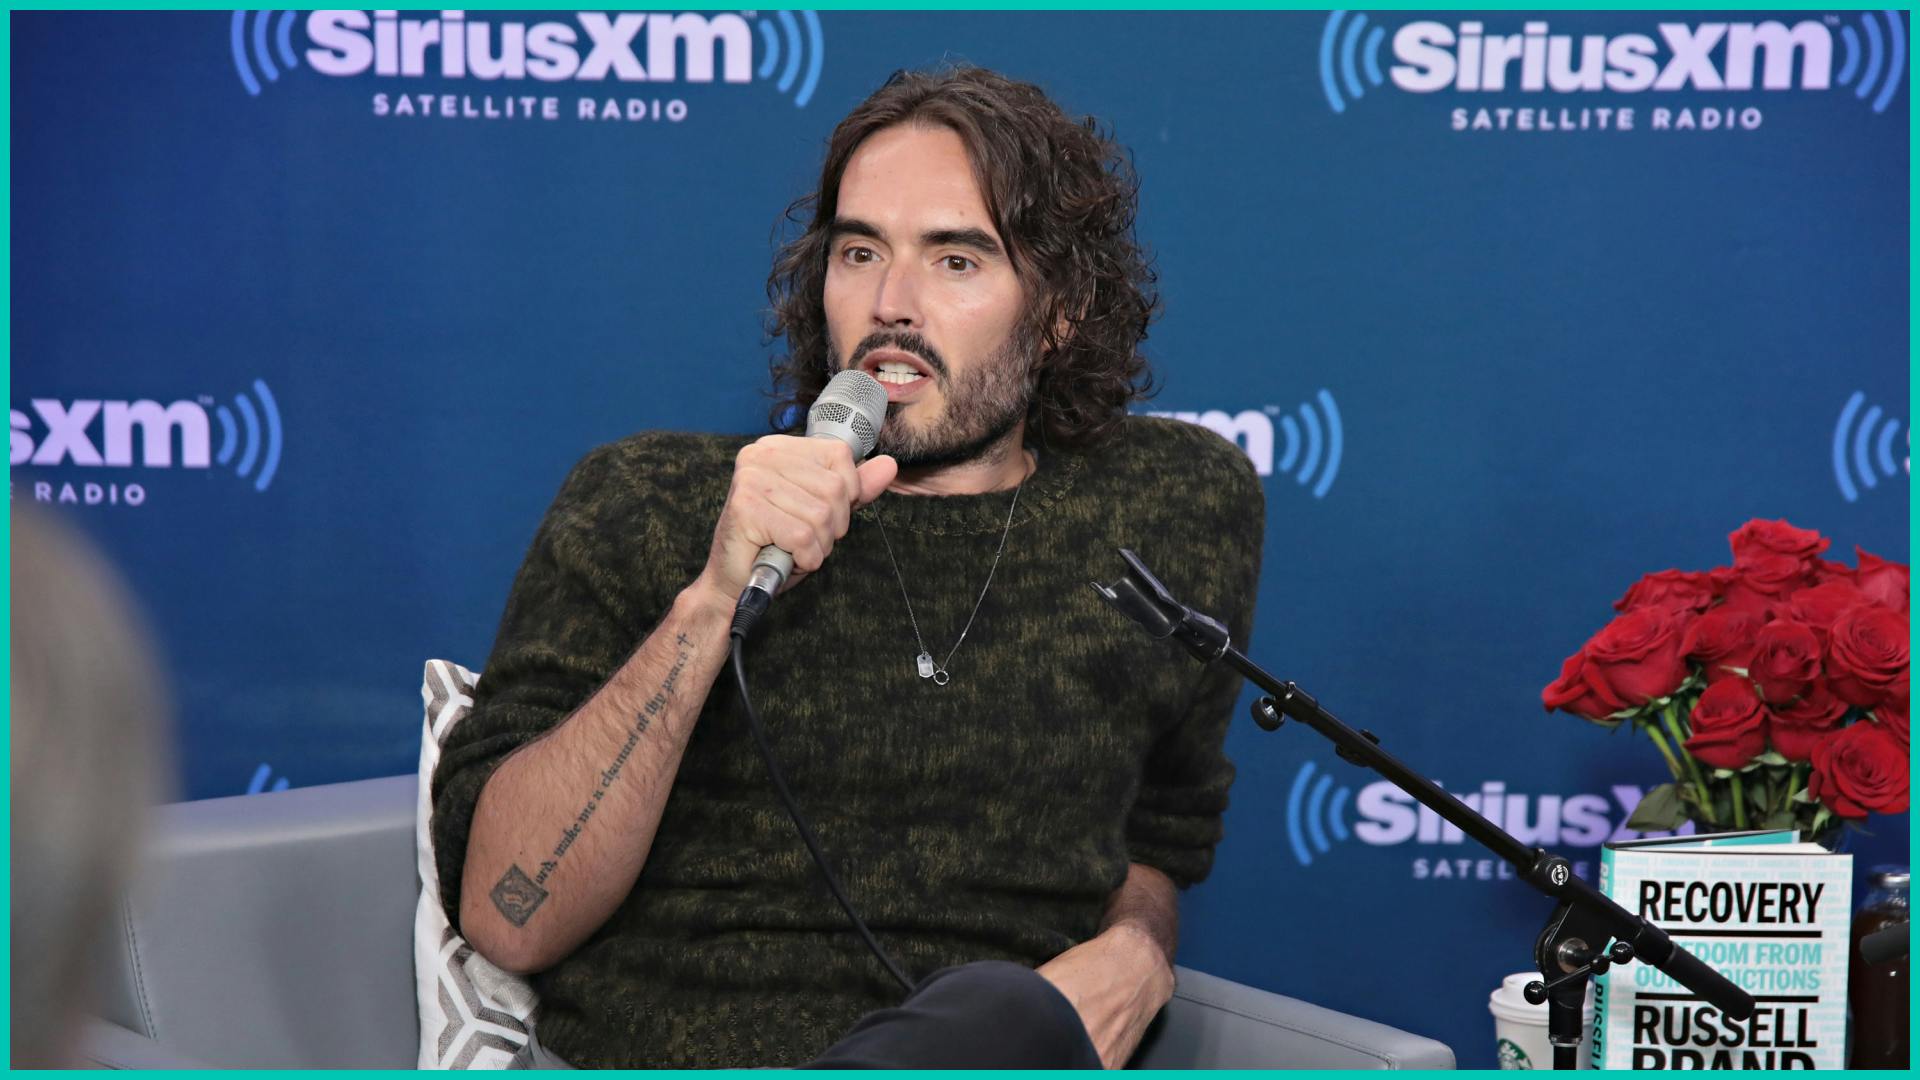 SiriusXM host Jenny McCarthy sits down with Russell Brand for a Town Hall at SiriusXM Studios on October 4, 2017 in New York City